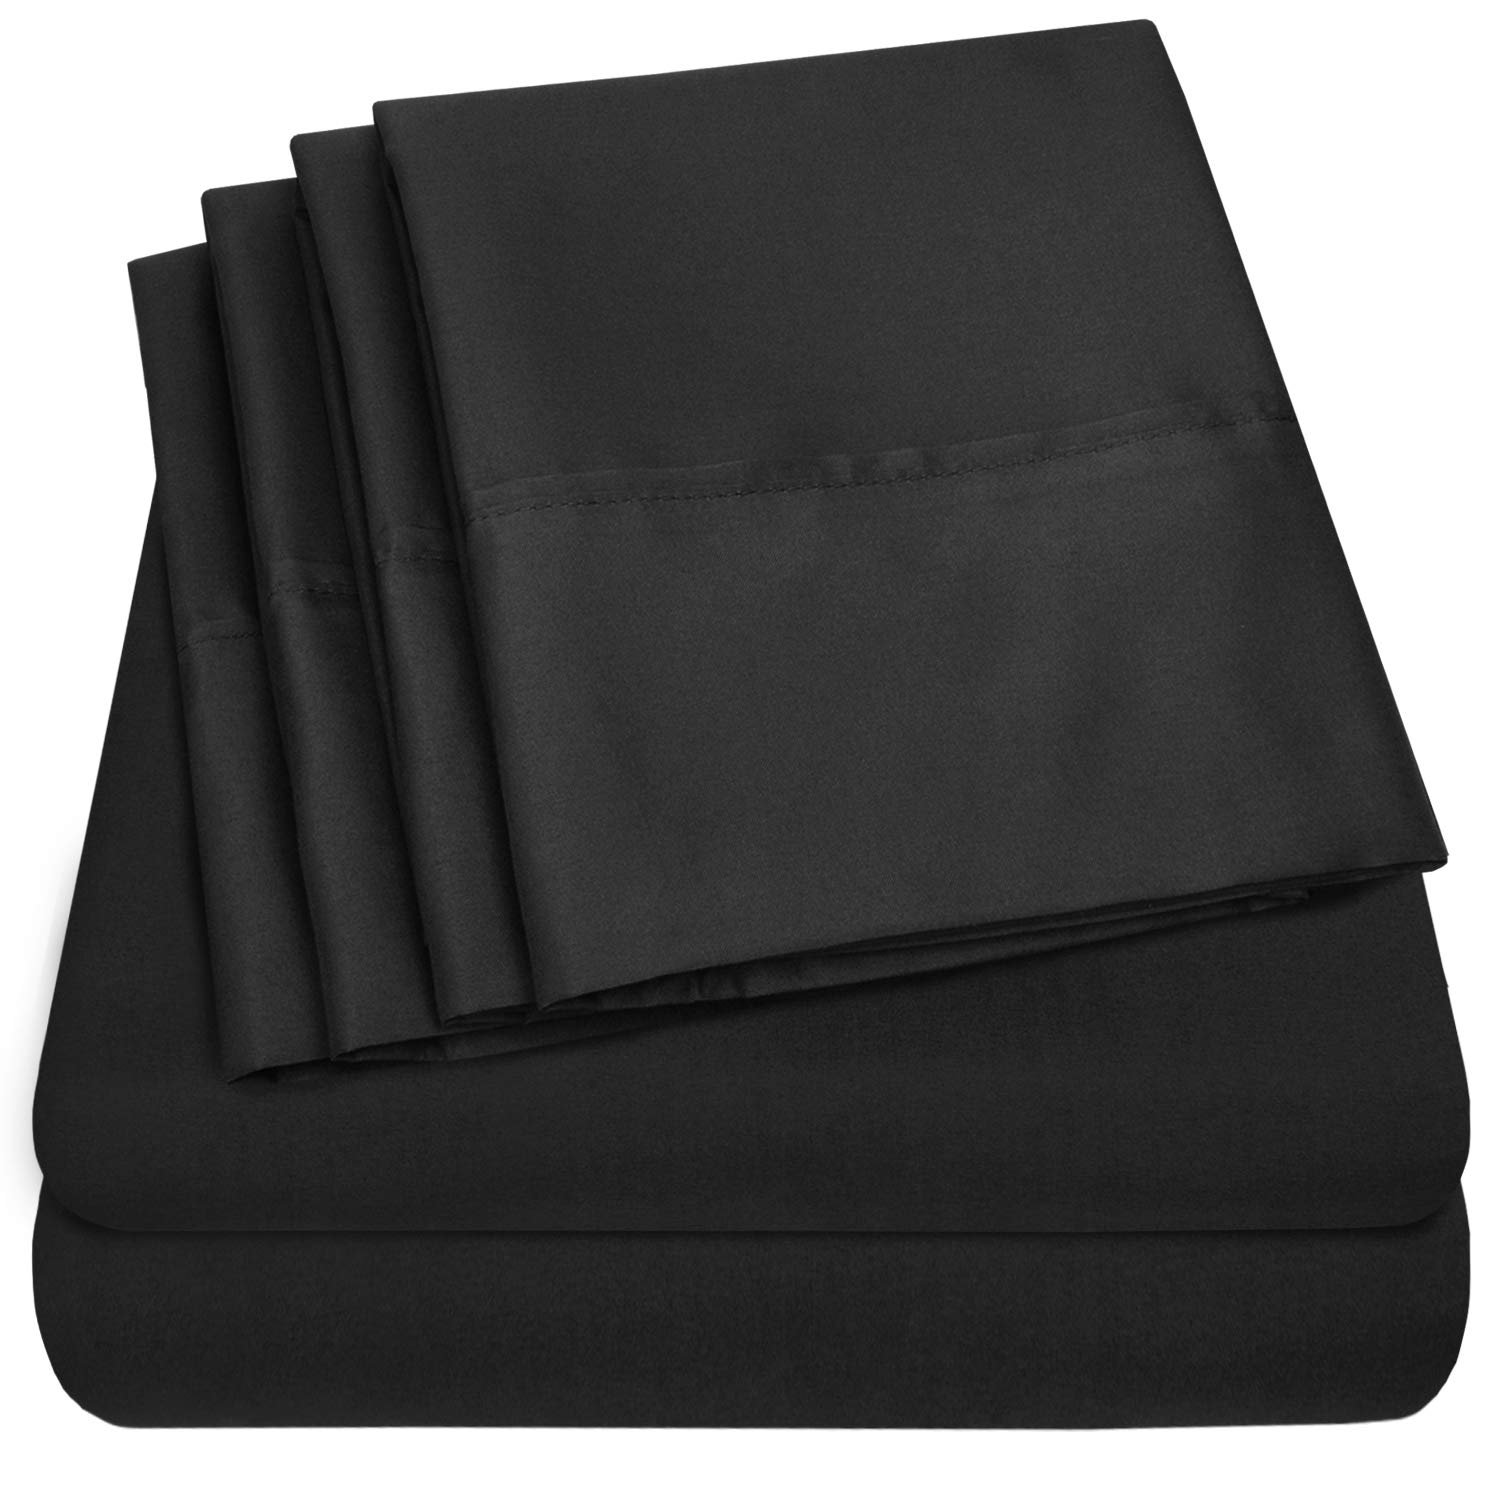 Book Cover Sweet Home Collection 6 Piece Bed Sheets 1500 Thread Count Fine Microfiber Deep Pocket Set-Extra Pillow Cases, Value, King, Black